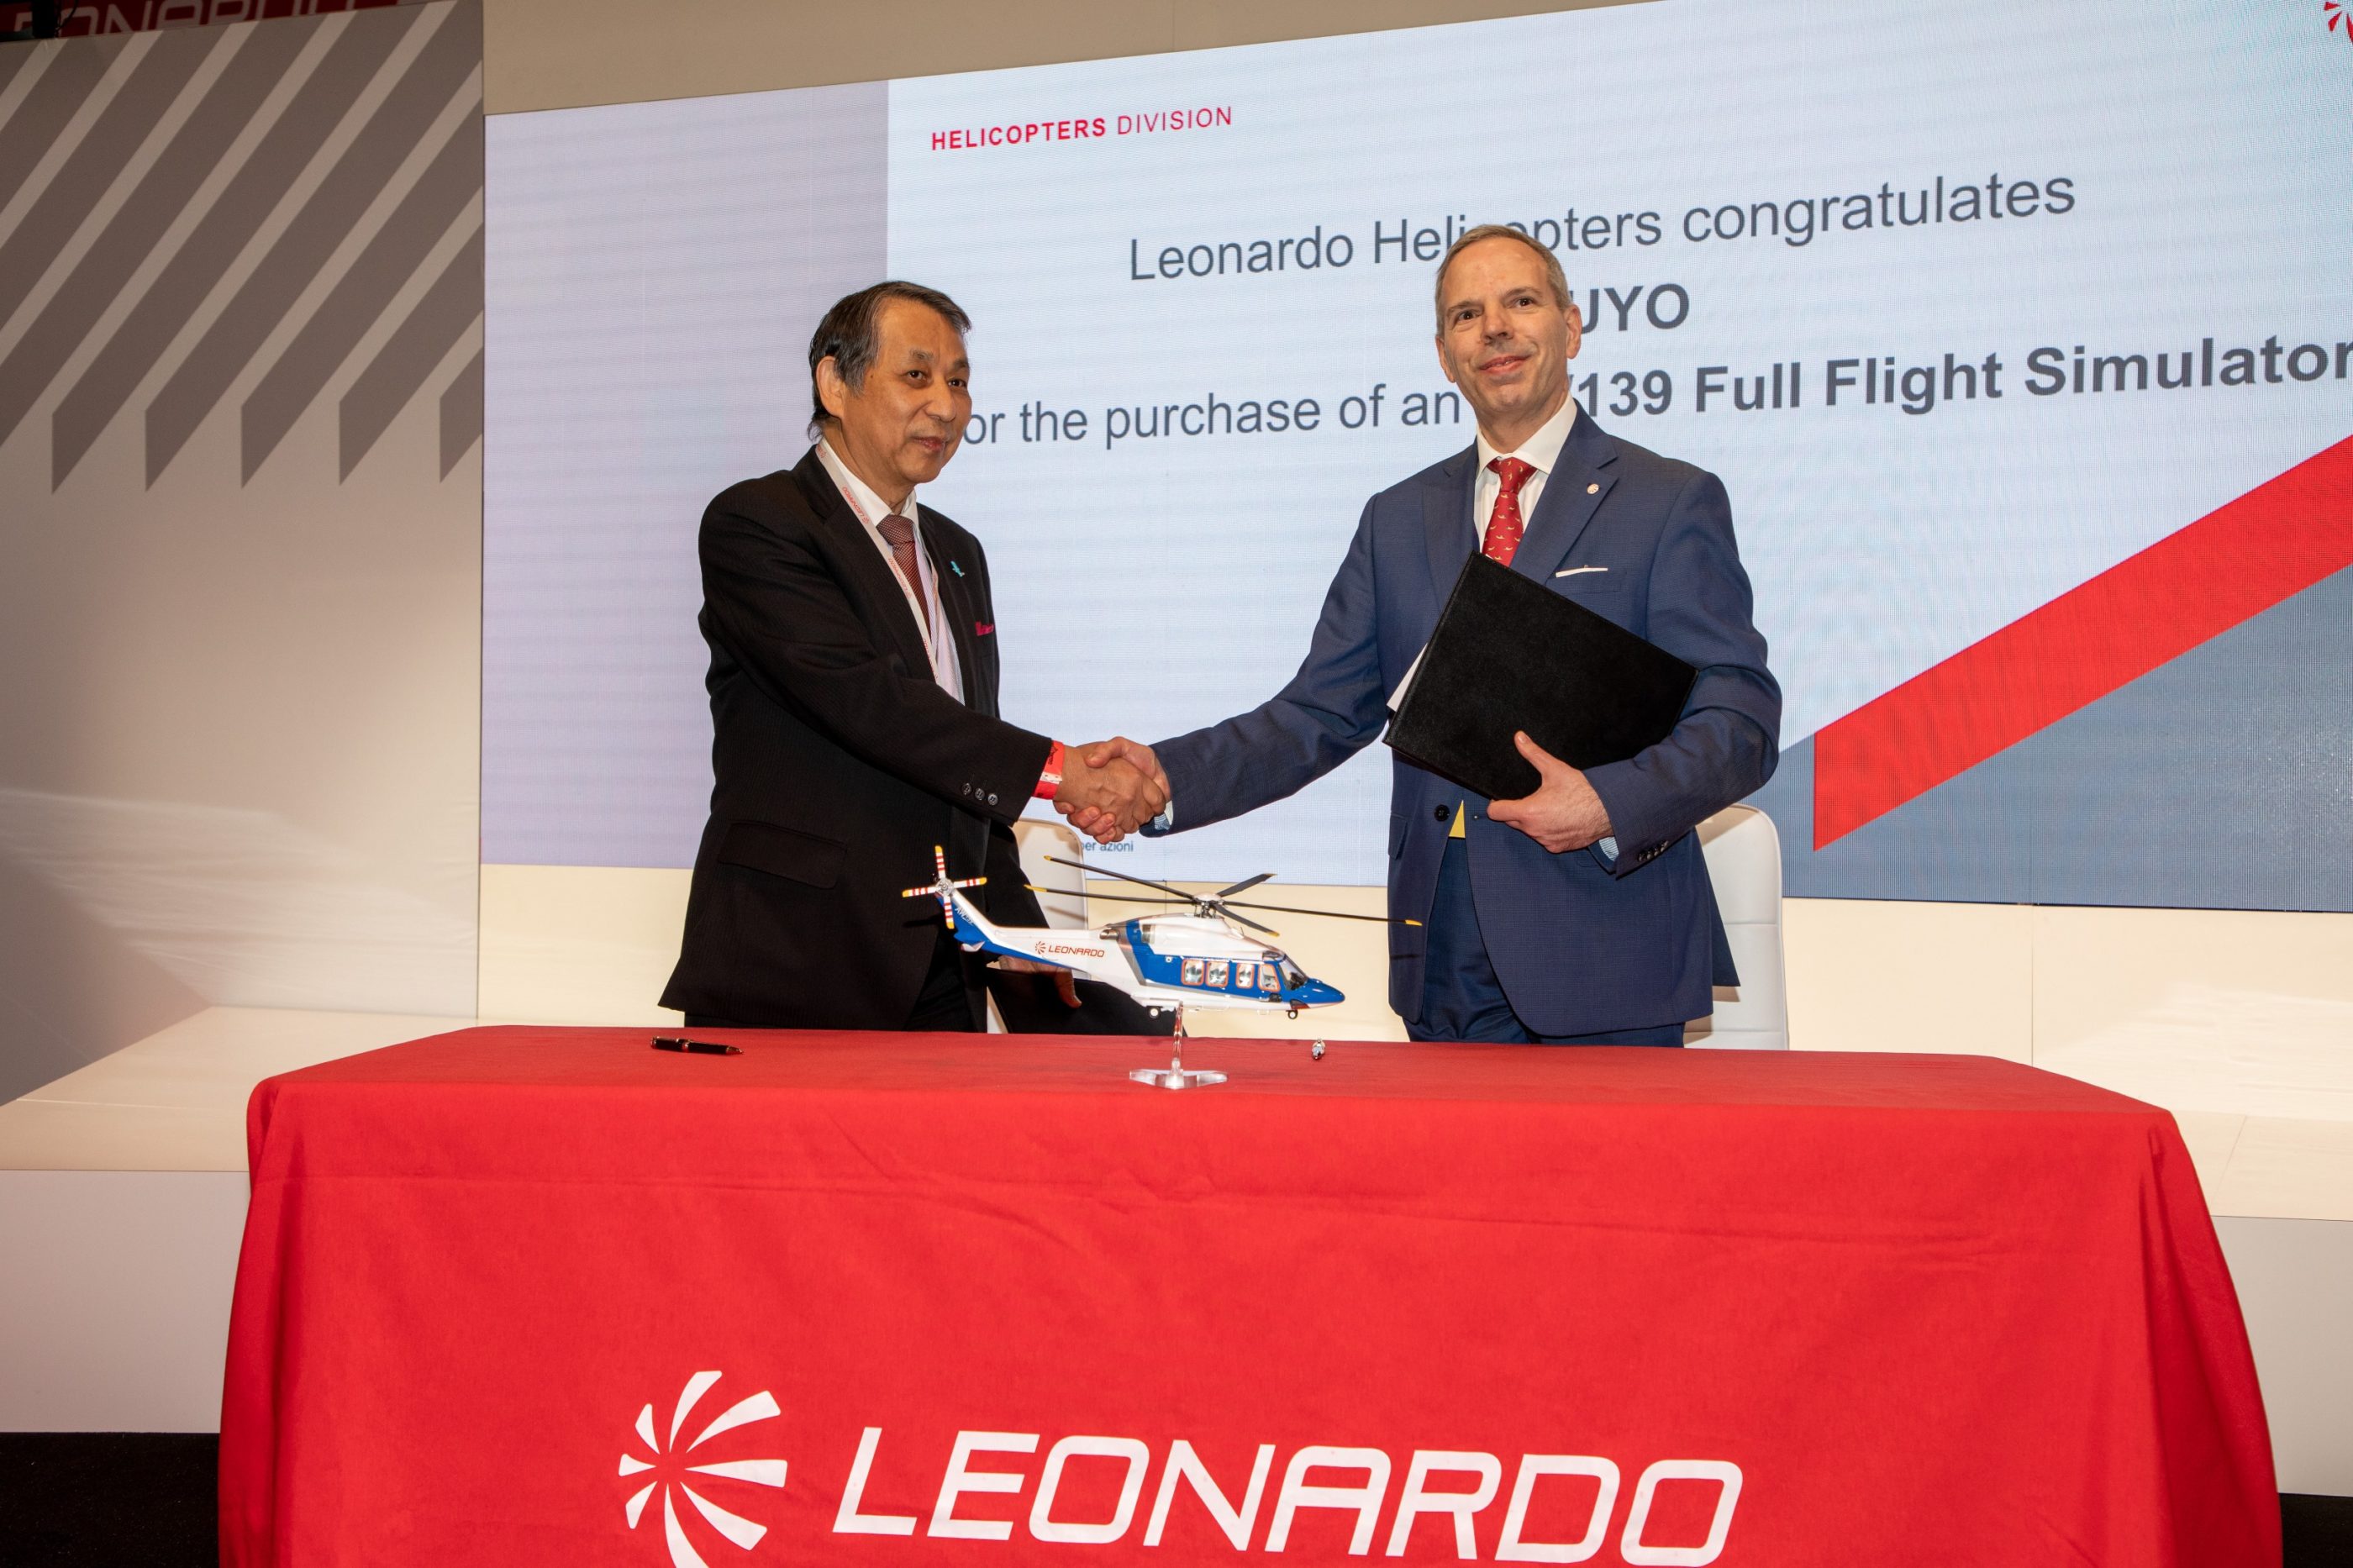 It will be the first AW139 Full Flight Simulator in Japan, combining E-Learning and procedural trainer capabilities to maximize safety and operational effectiveness. Leonardo Photo